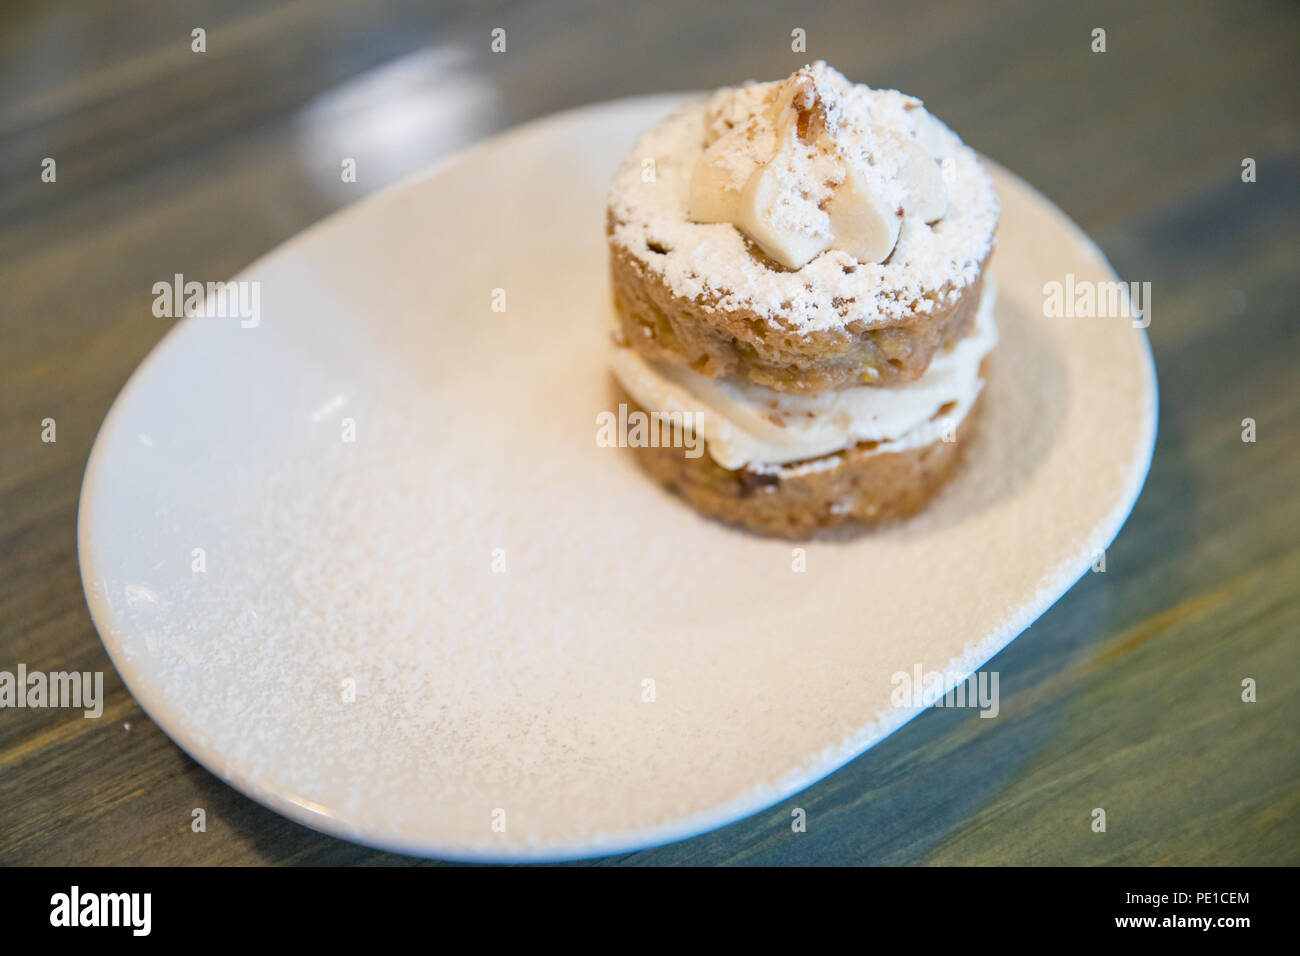 Homemade fruity Hummingbird cake with walnuts and cinnamon on the white plate. Stock Photo